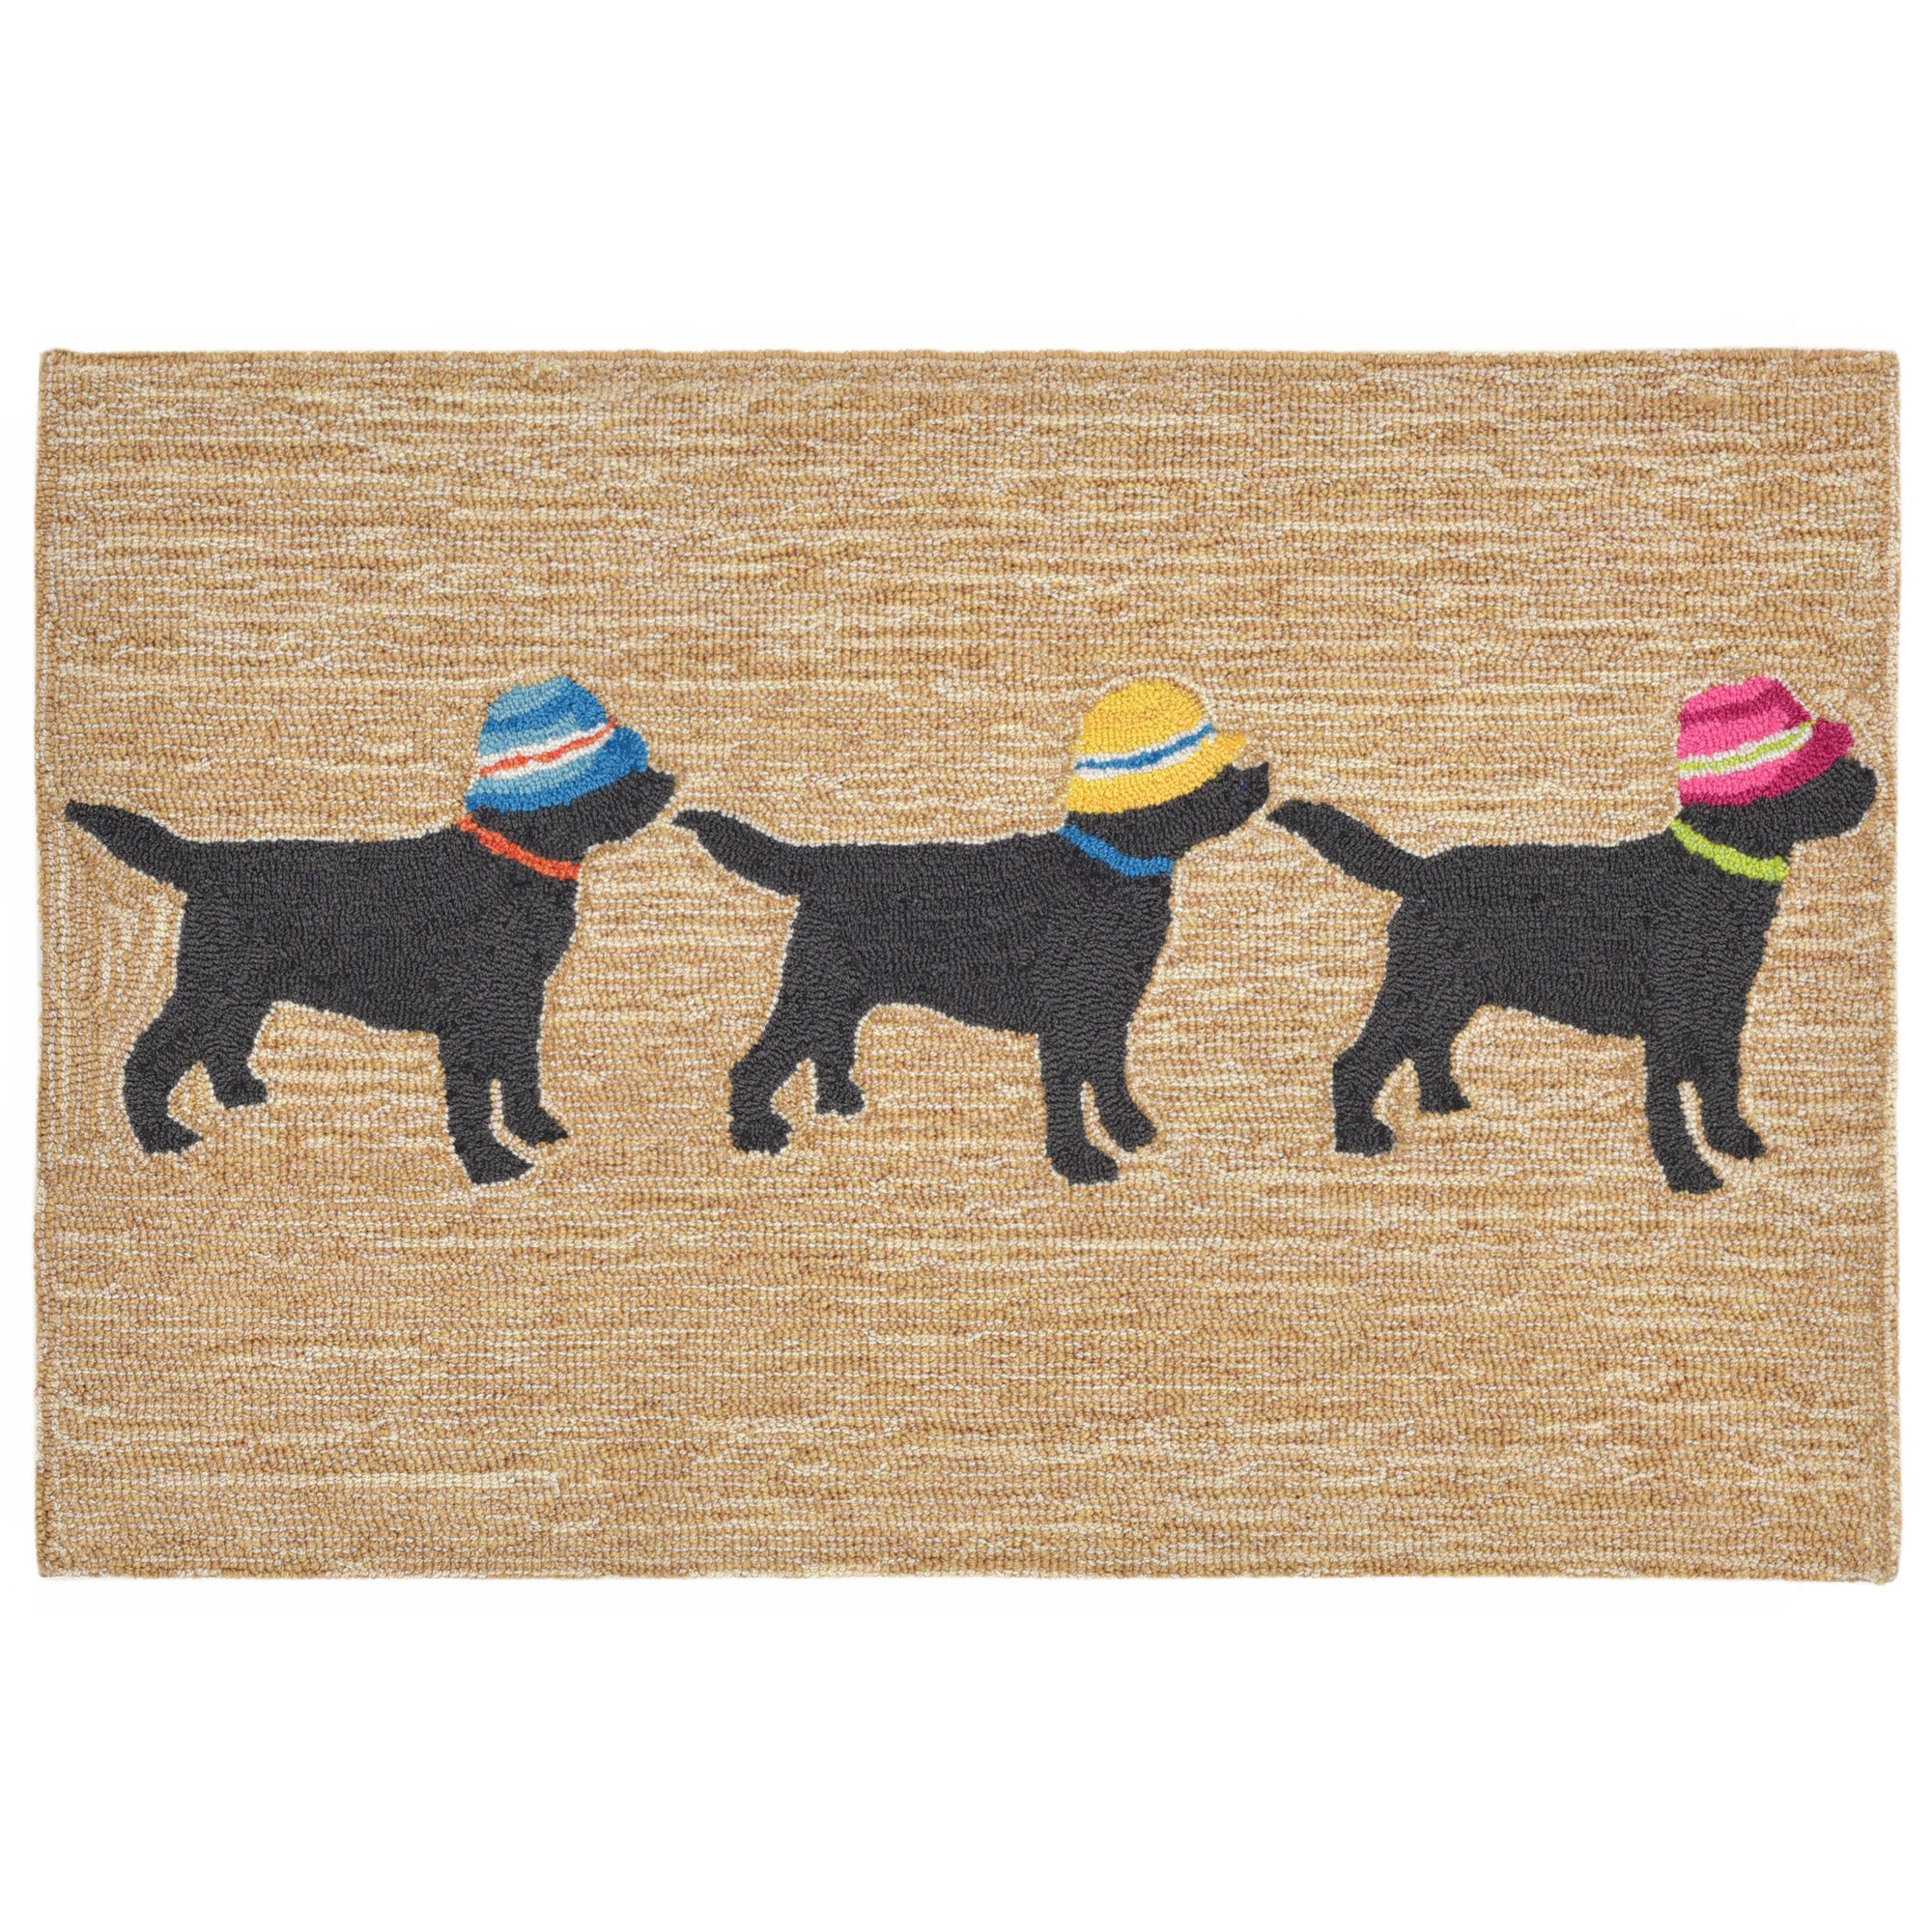 Trans-ocean Imports Ftp12185512 Liora Manne Frontporch 3 Dogs Vacation Indoor/outdoor Rug Natural 20"x30"